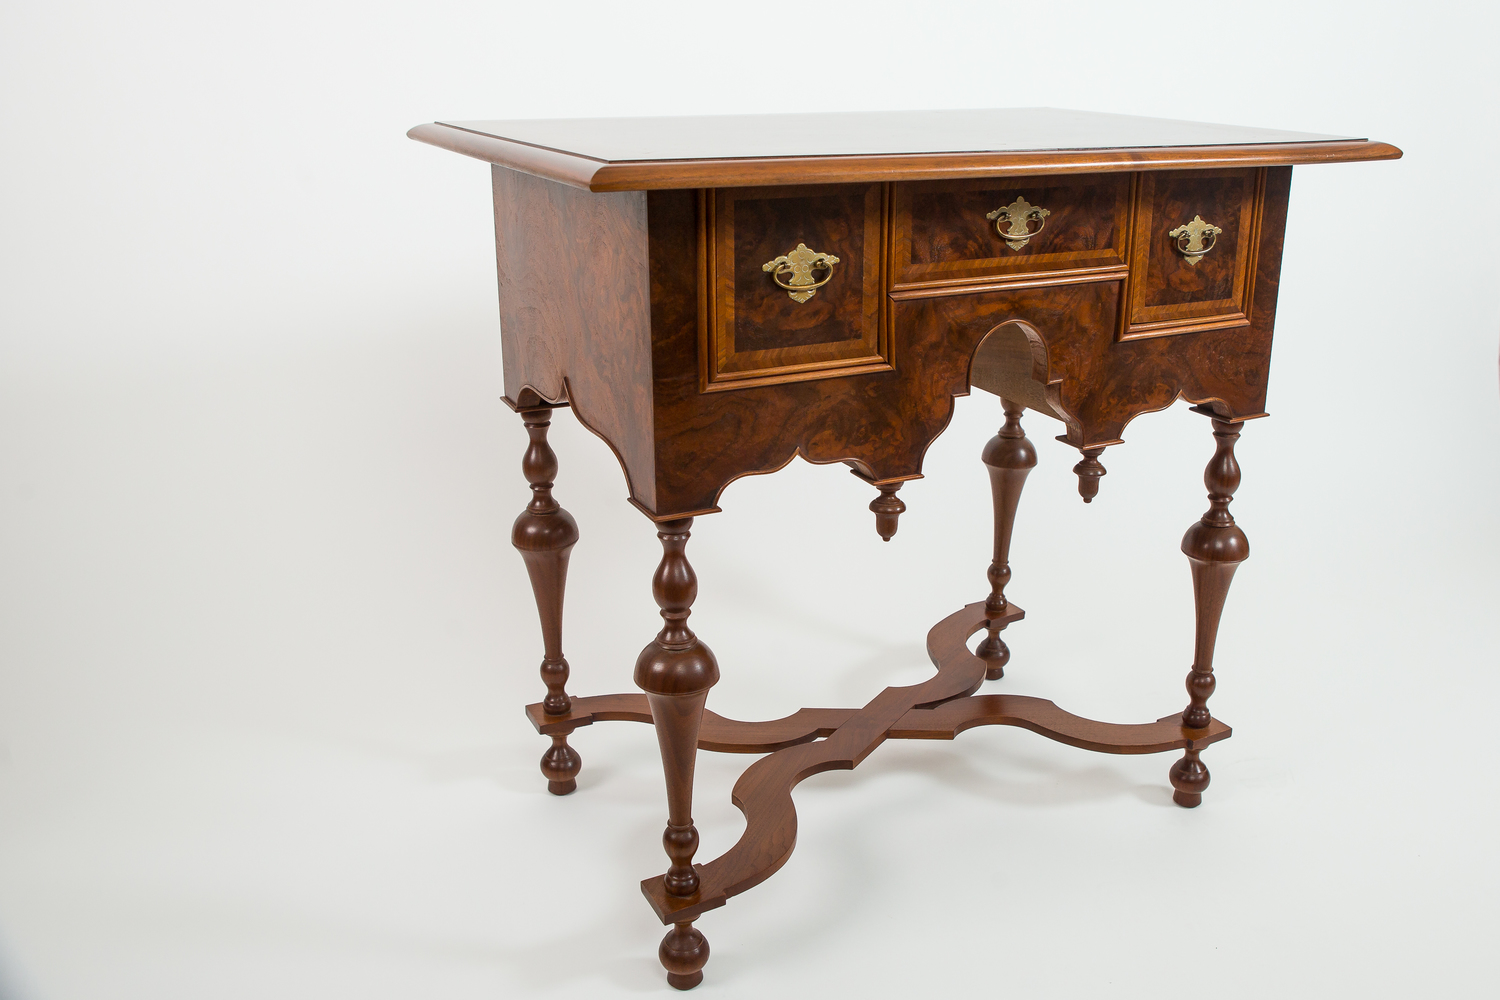 Reproduction William and Mary dressing table.